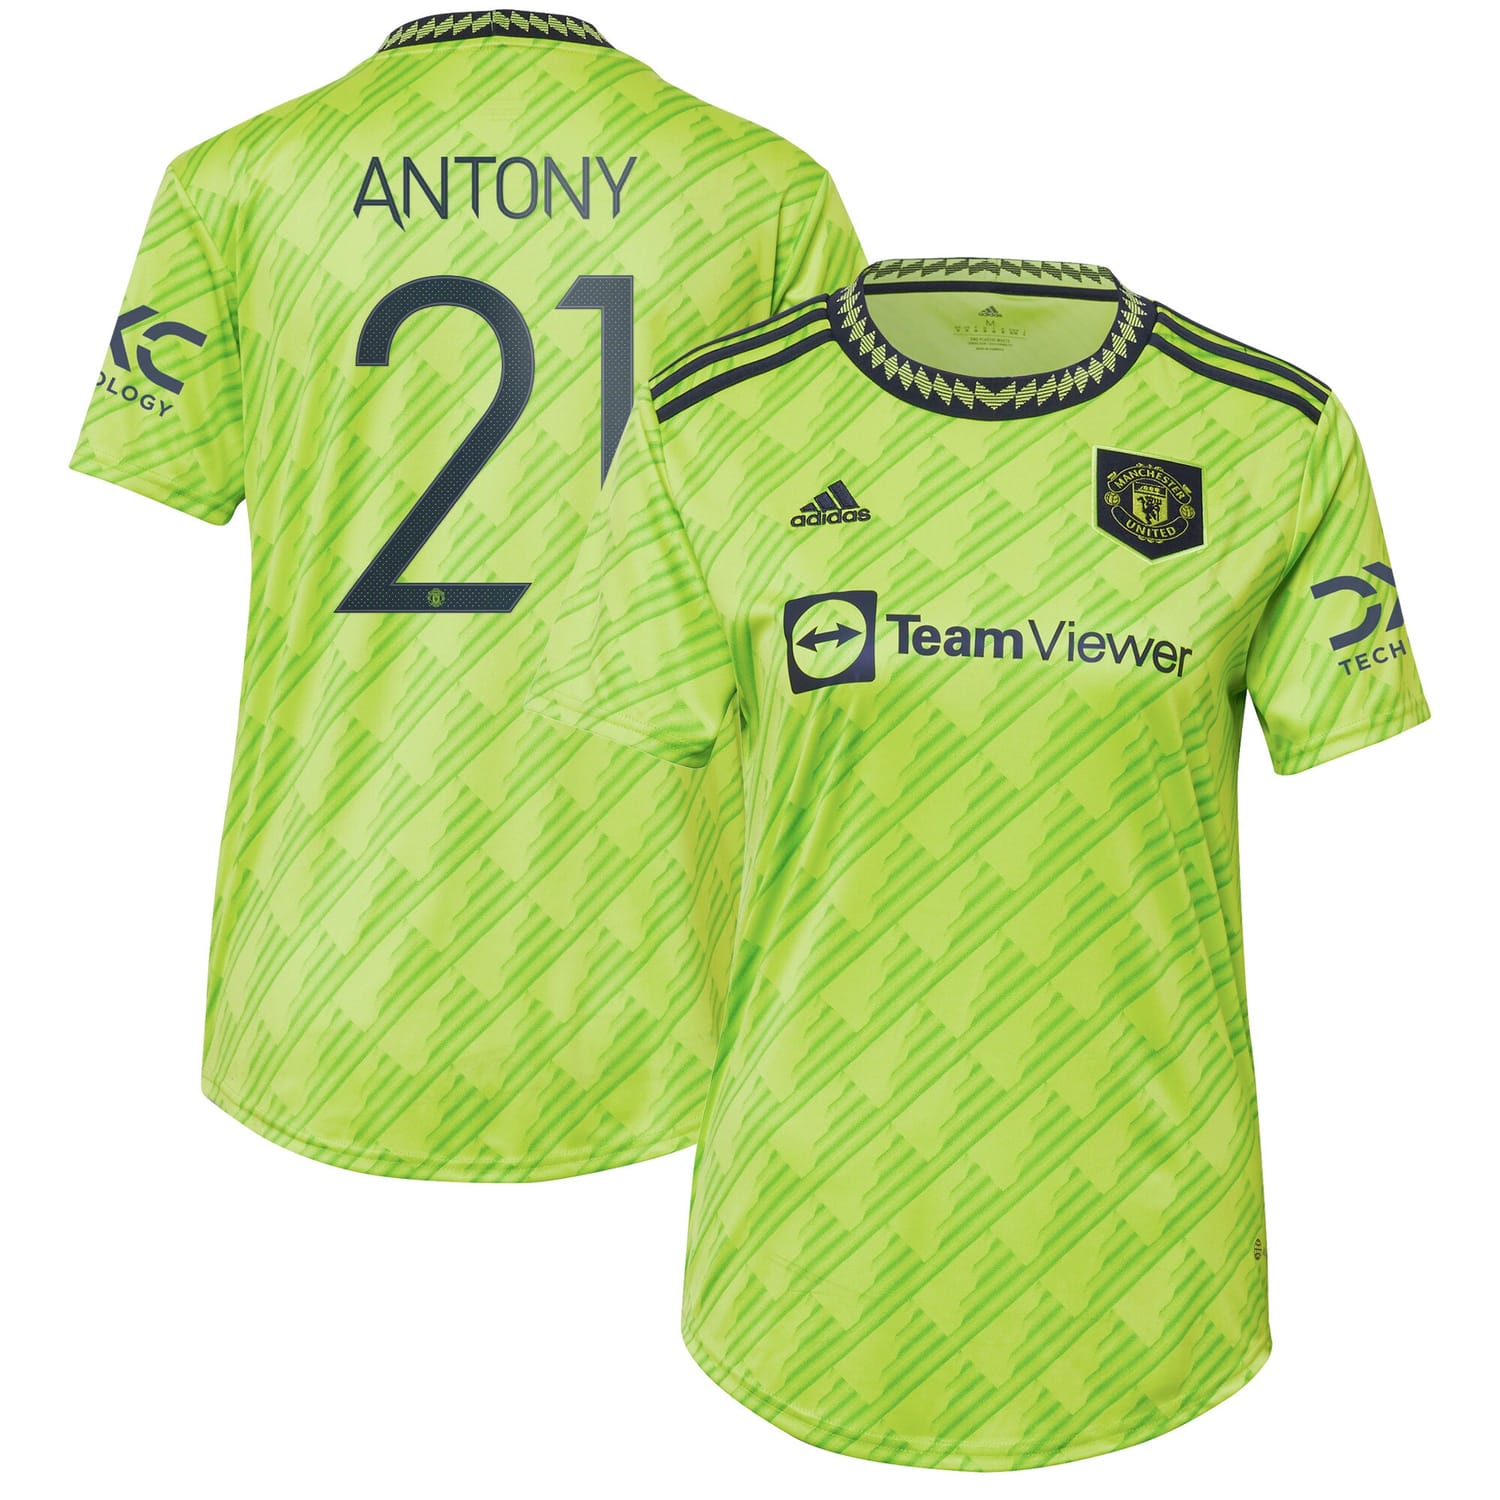 Premier League Manchester United Third Cup Jersey Shirt 2022-23 player Antony 21 printing for Women